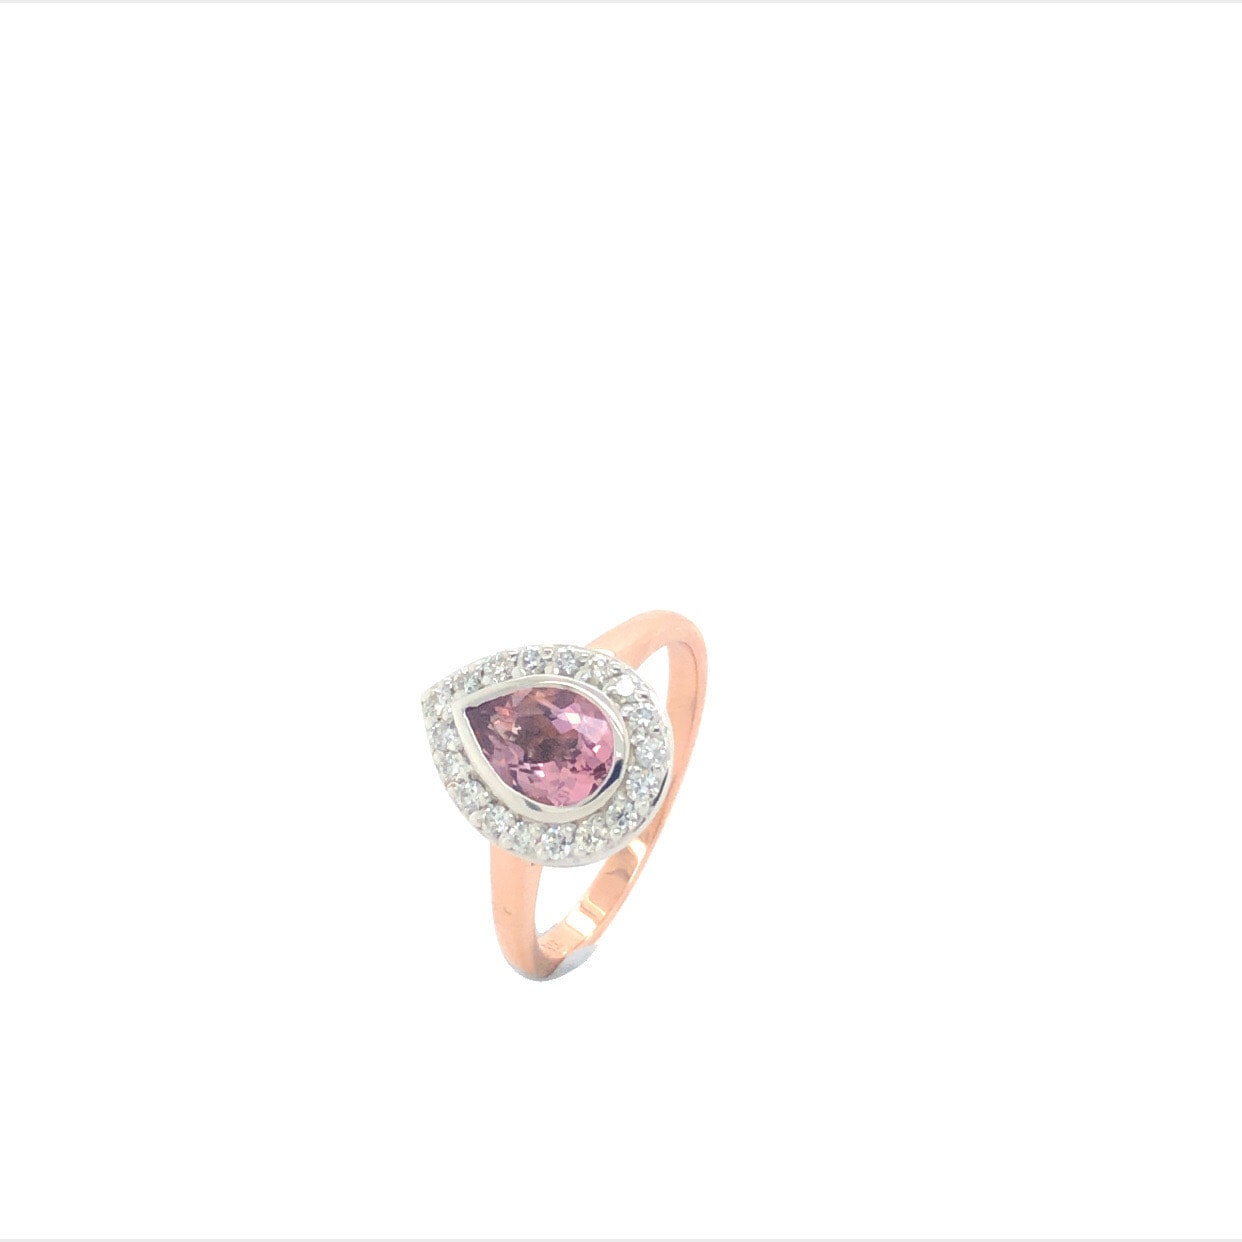 Pear shape Morganite with Diamond Halo Ring 9ct White Gold & 9ct Rose Gold_0